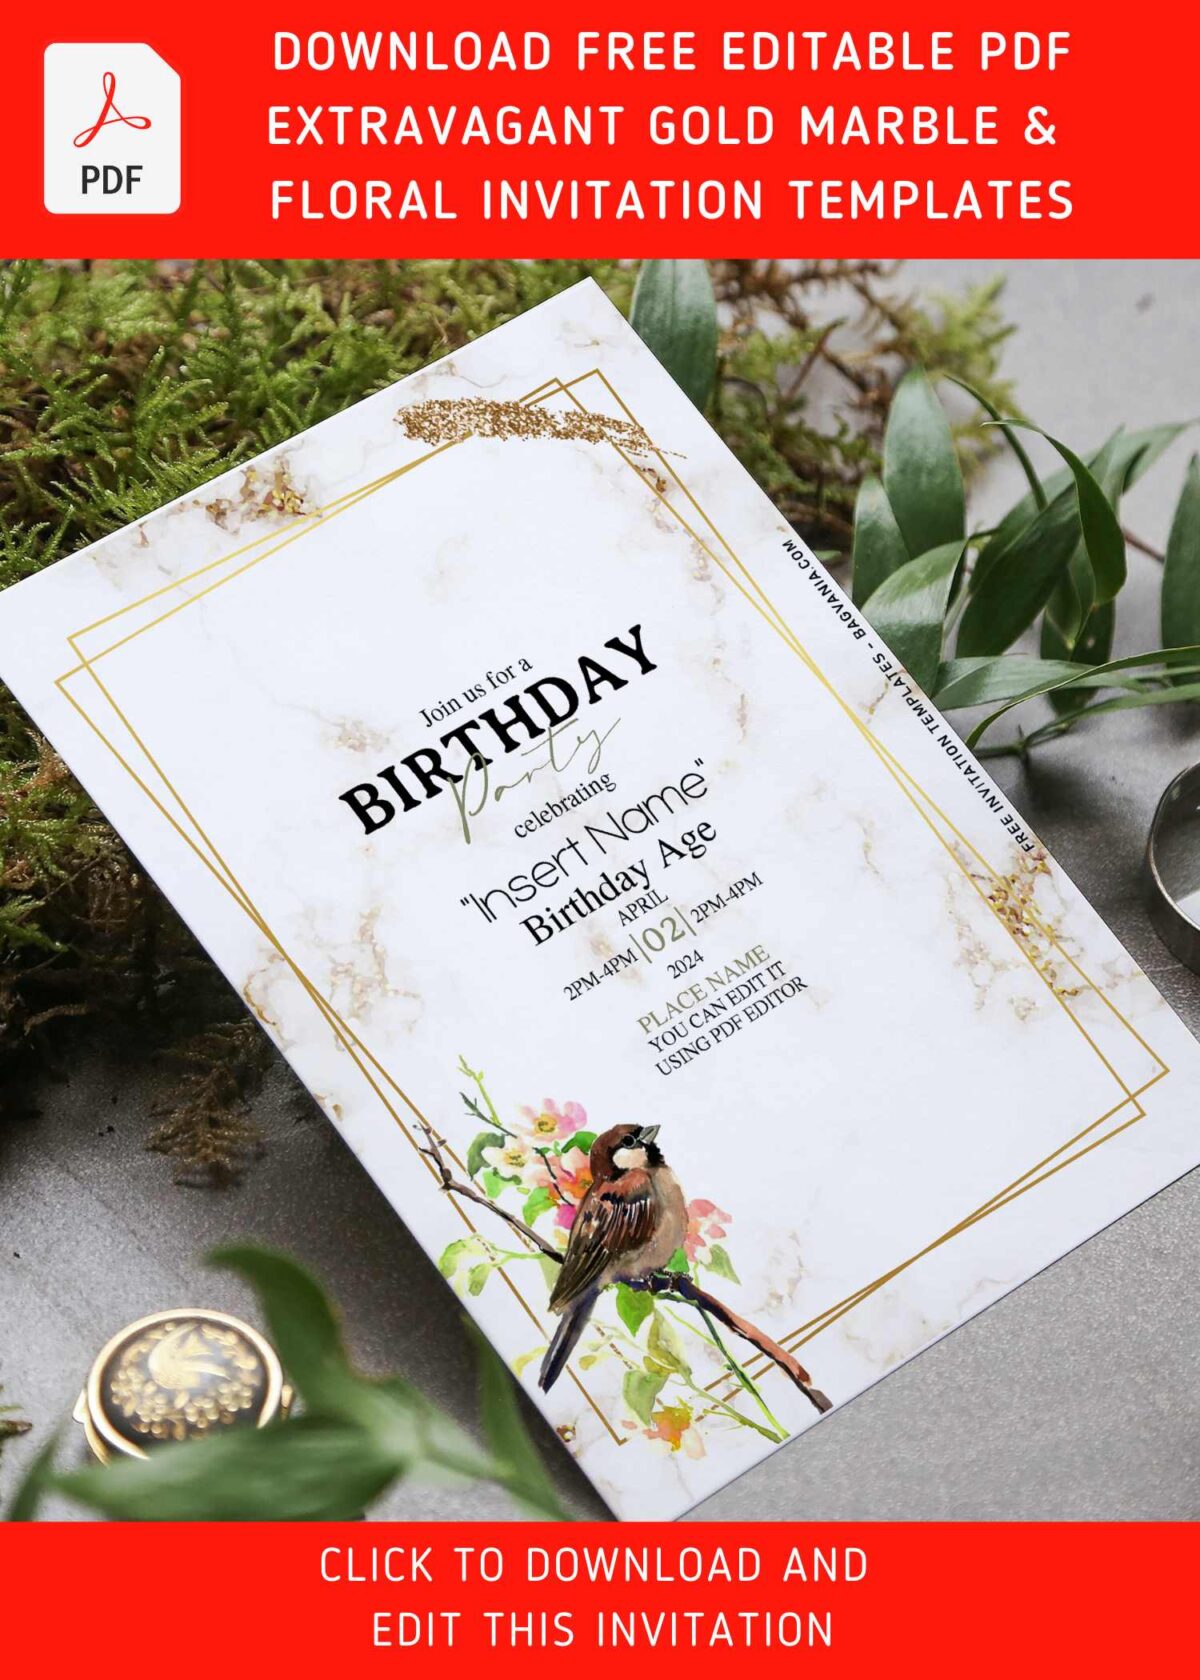 (Free Editable PDF) Charming Floral & Bird On Marble Birthday Invitation Templates with watercolor birds